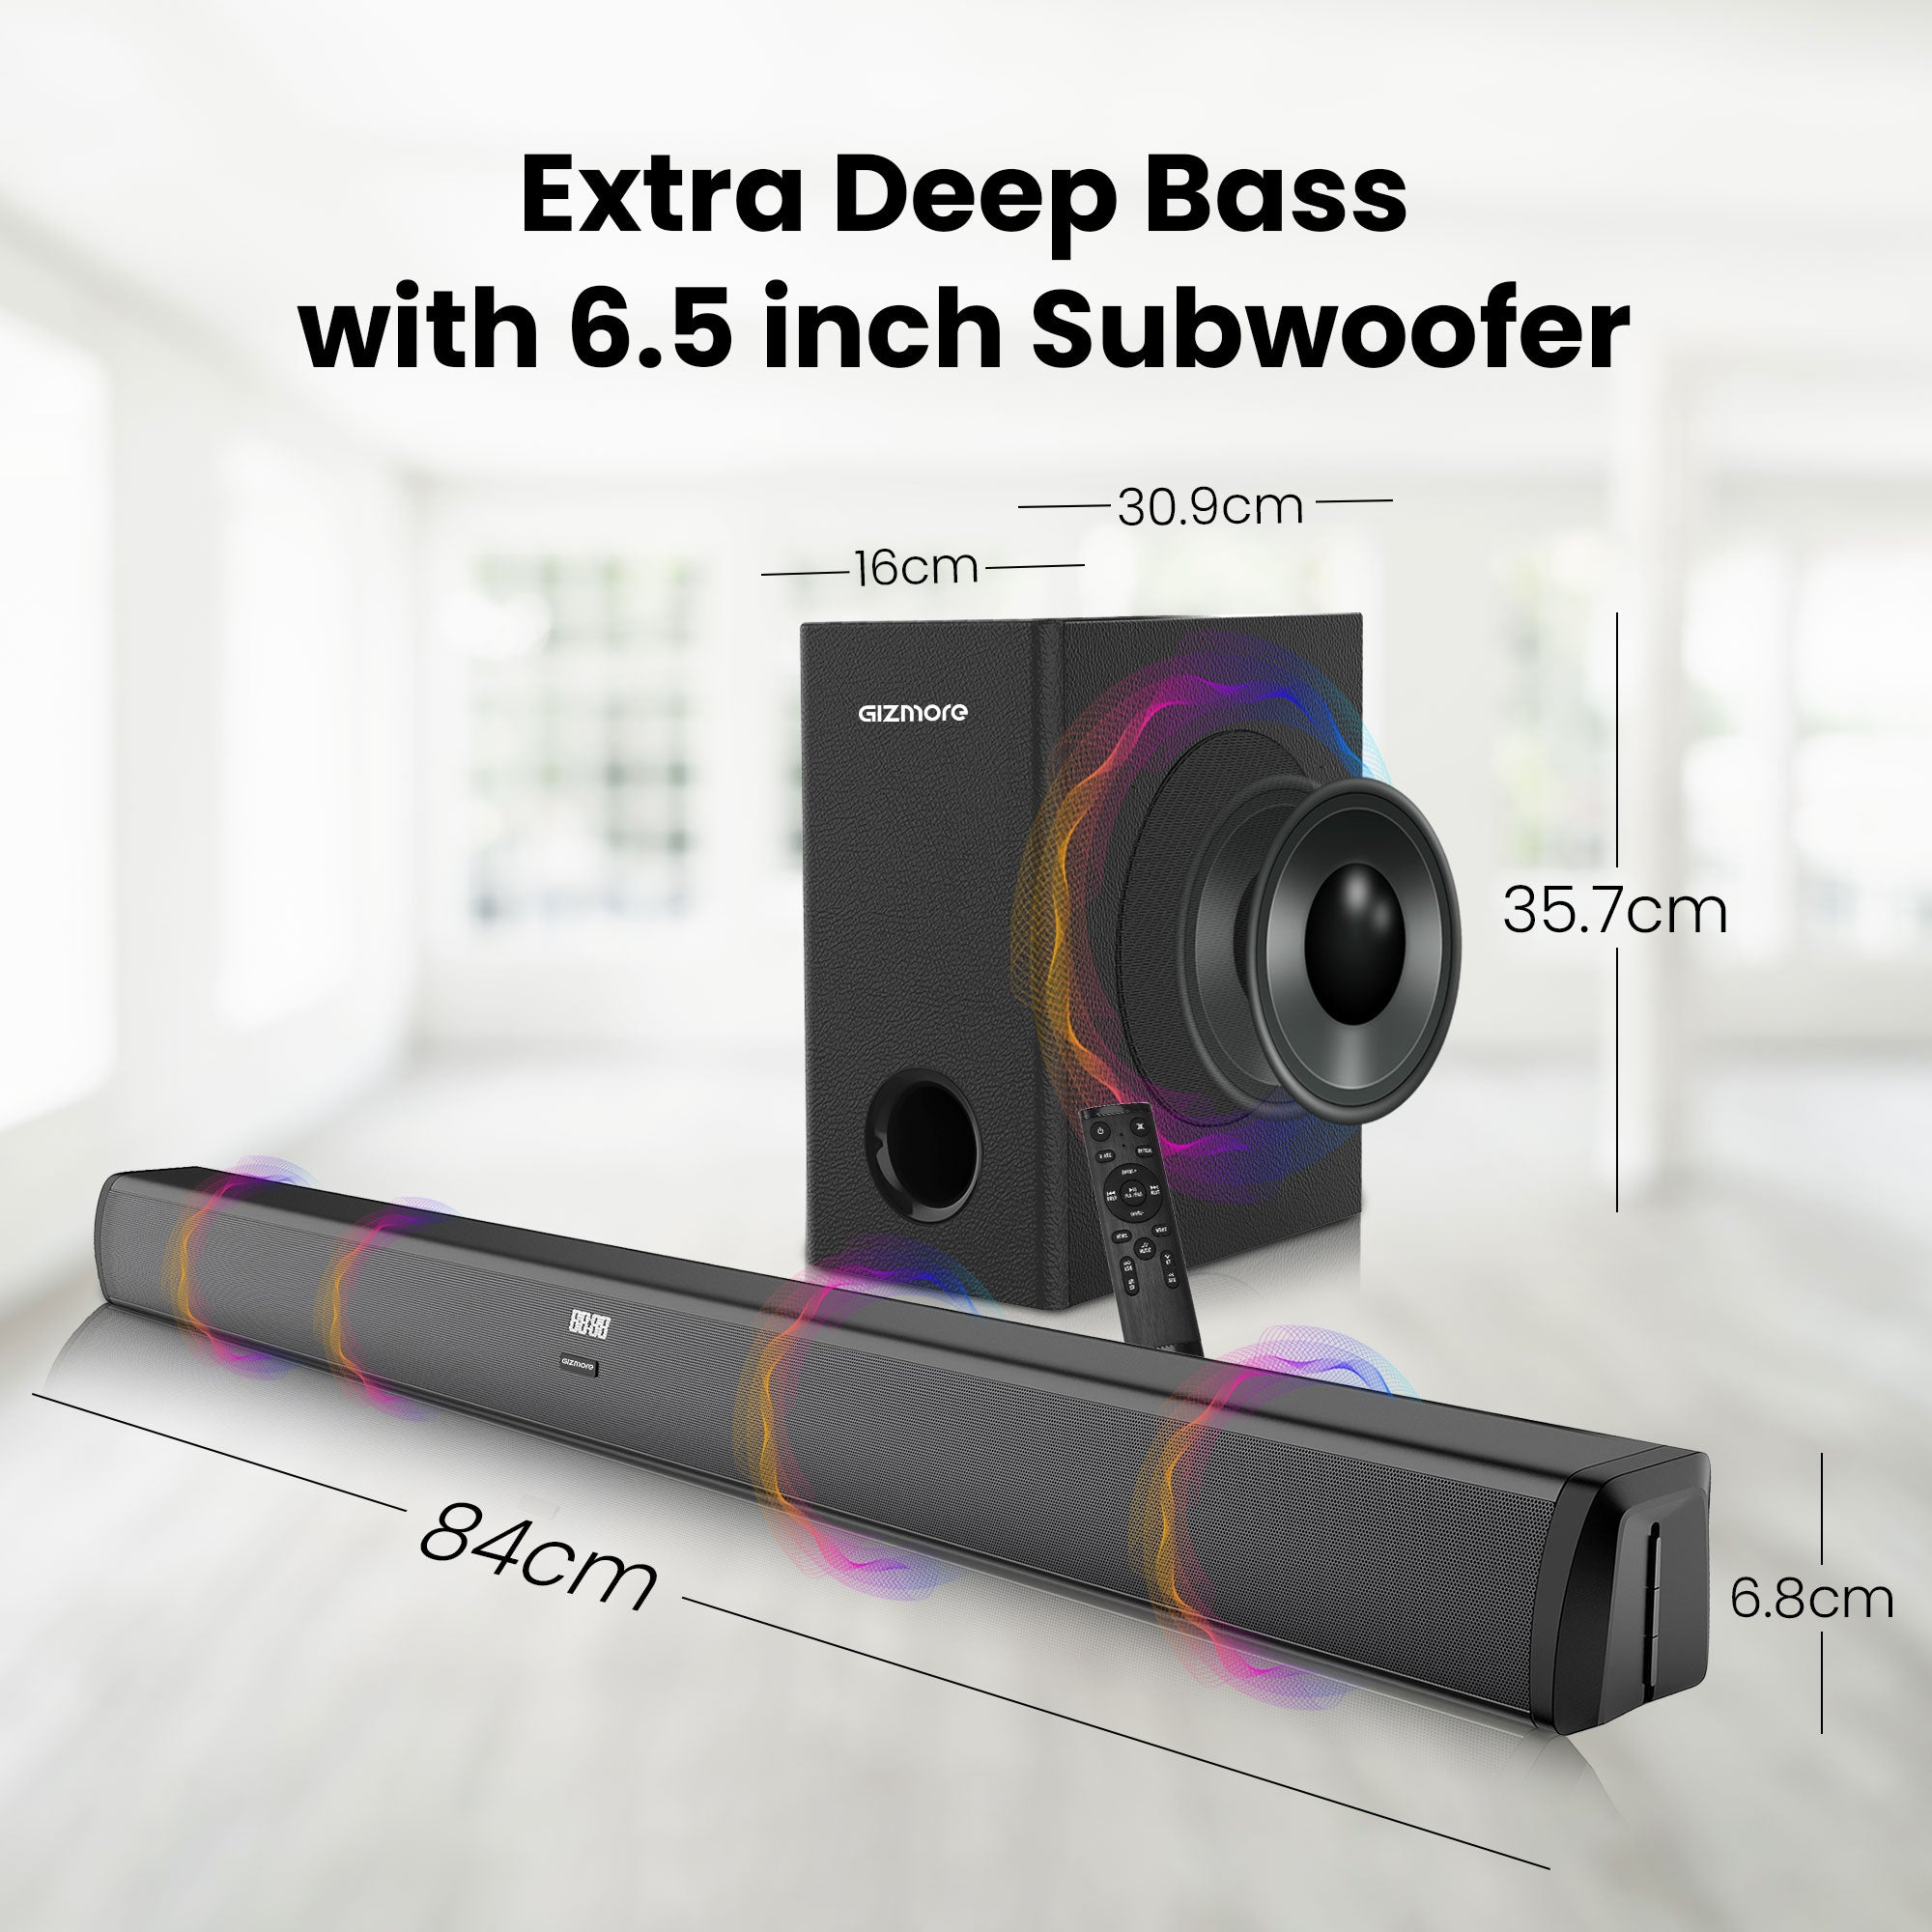 GIZMORE BAR14000, Wired Soundbar with 6.5 Inch Subwoofer for Extra Deep Bass, 2.1 Channel Home Theatre with Remote, EQ Modes, HDMI/ARC, Bluetooth & Optical Connectivity (200W)